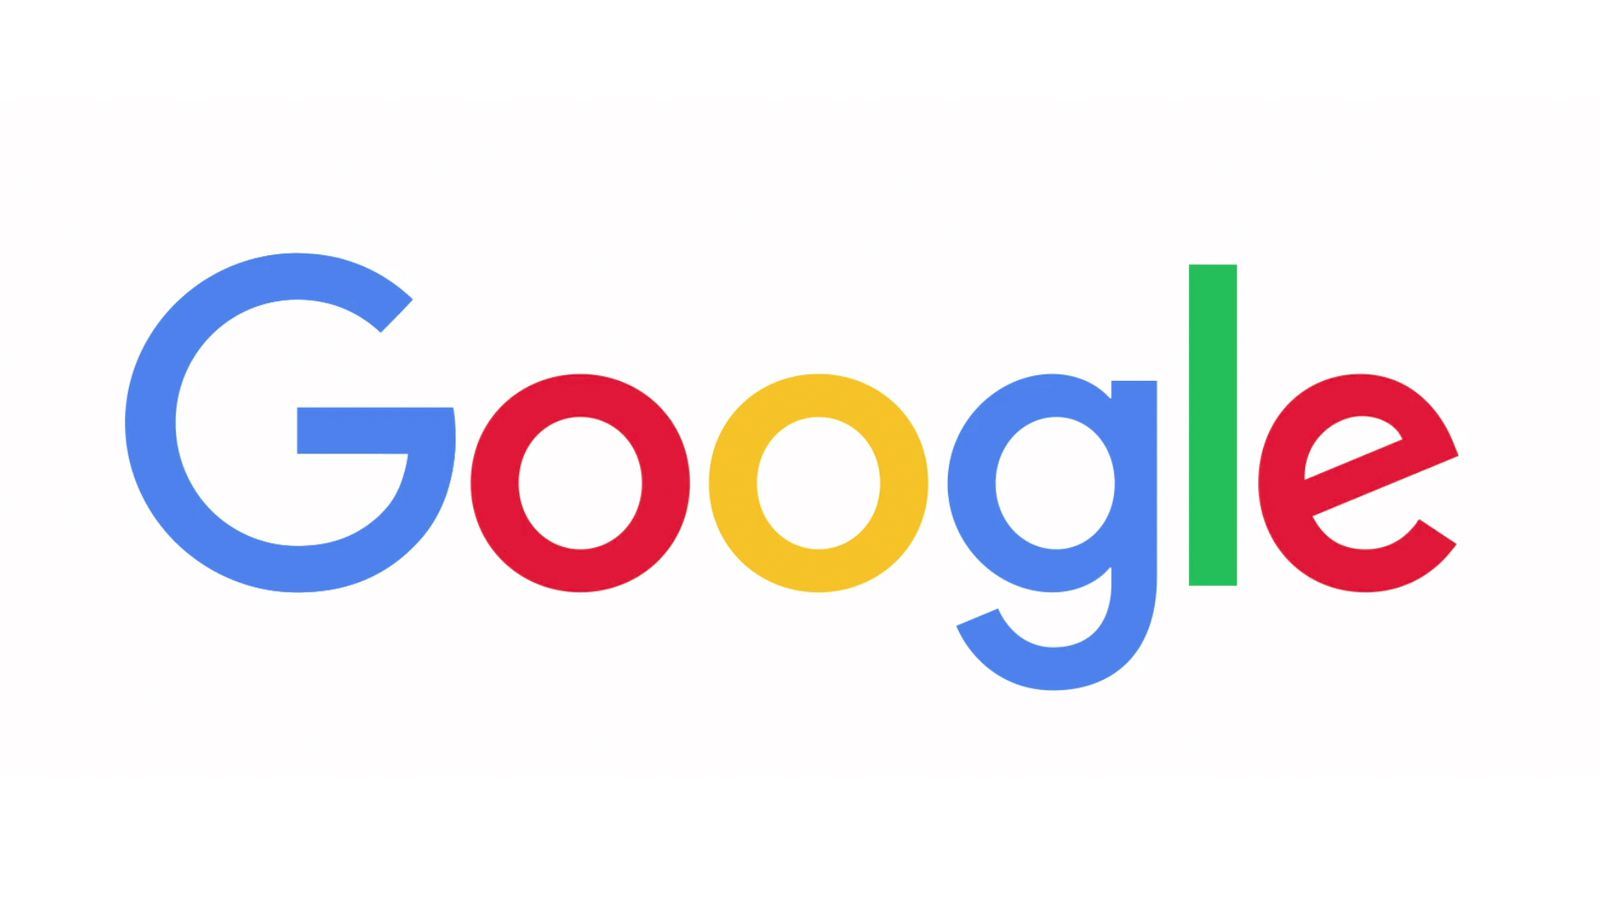 Good Morning everyone! Here's a news for you! Google came up with its new logo!Follow the link below for more details... I liked the makeover though :) 

